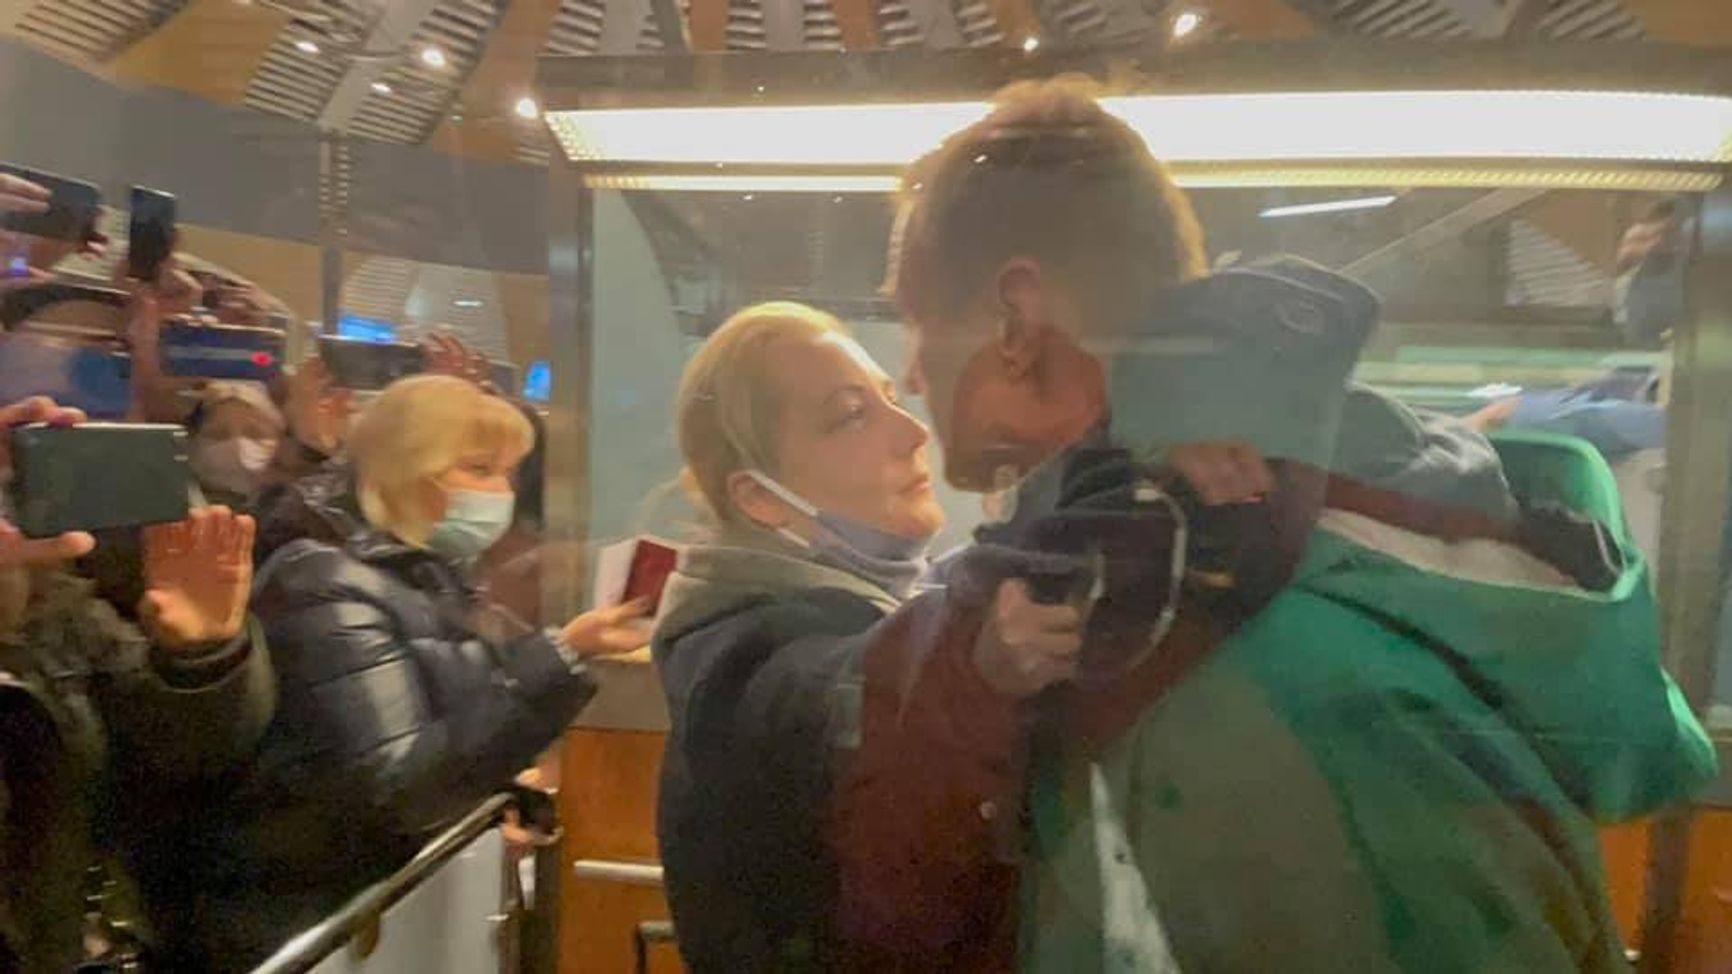 Alexei Navalny says goodbye to his wife in Sheremetyevo. He was arrested at the passport control, his lawyer was not allowed to accompany him.